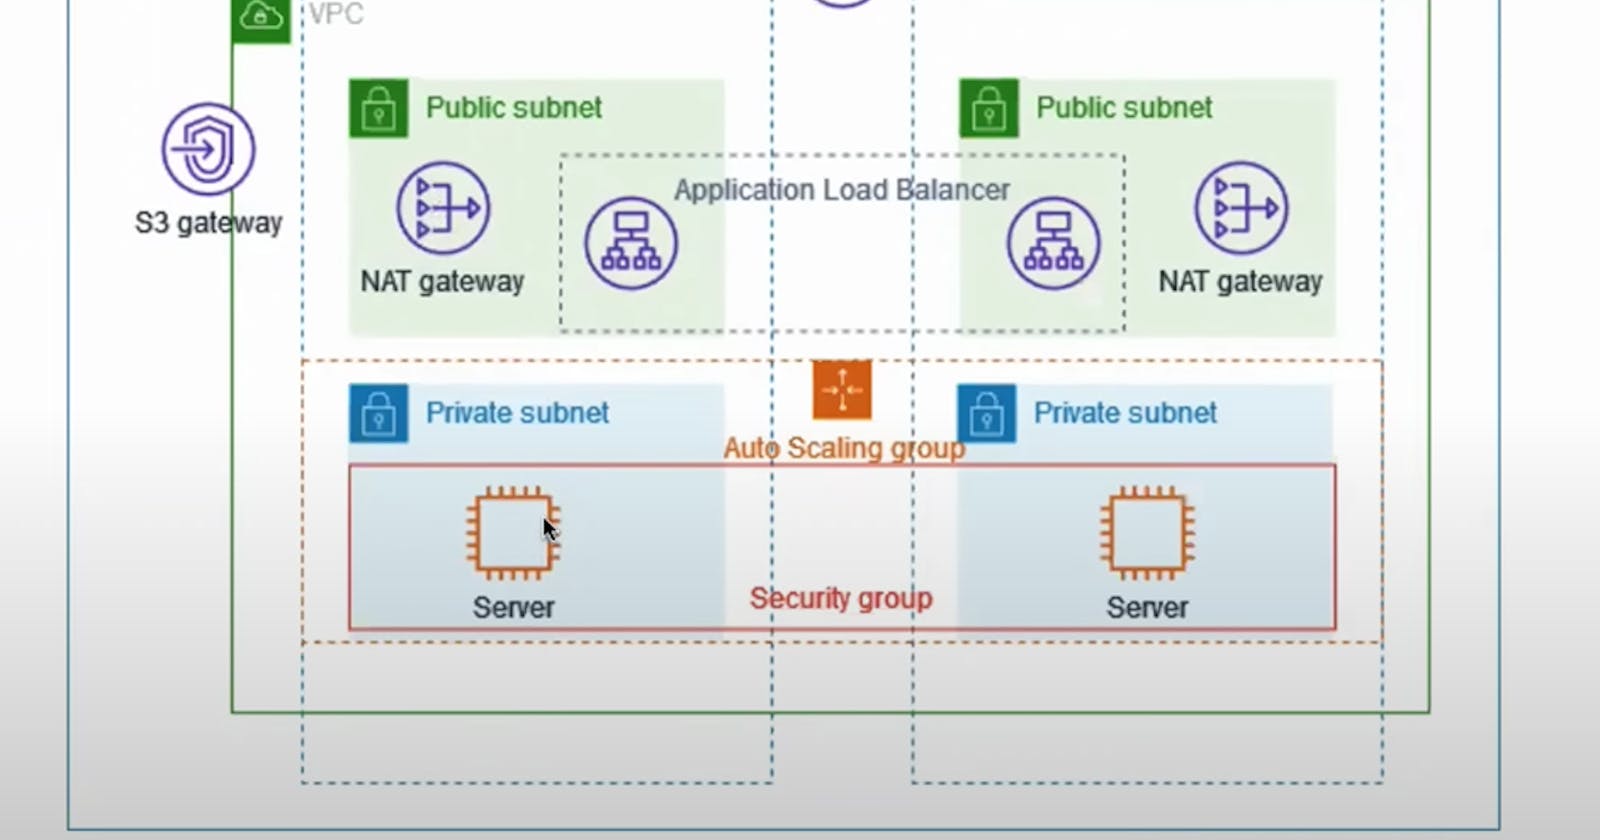 VPC with public and private subnet in production.